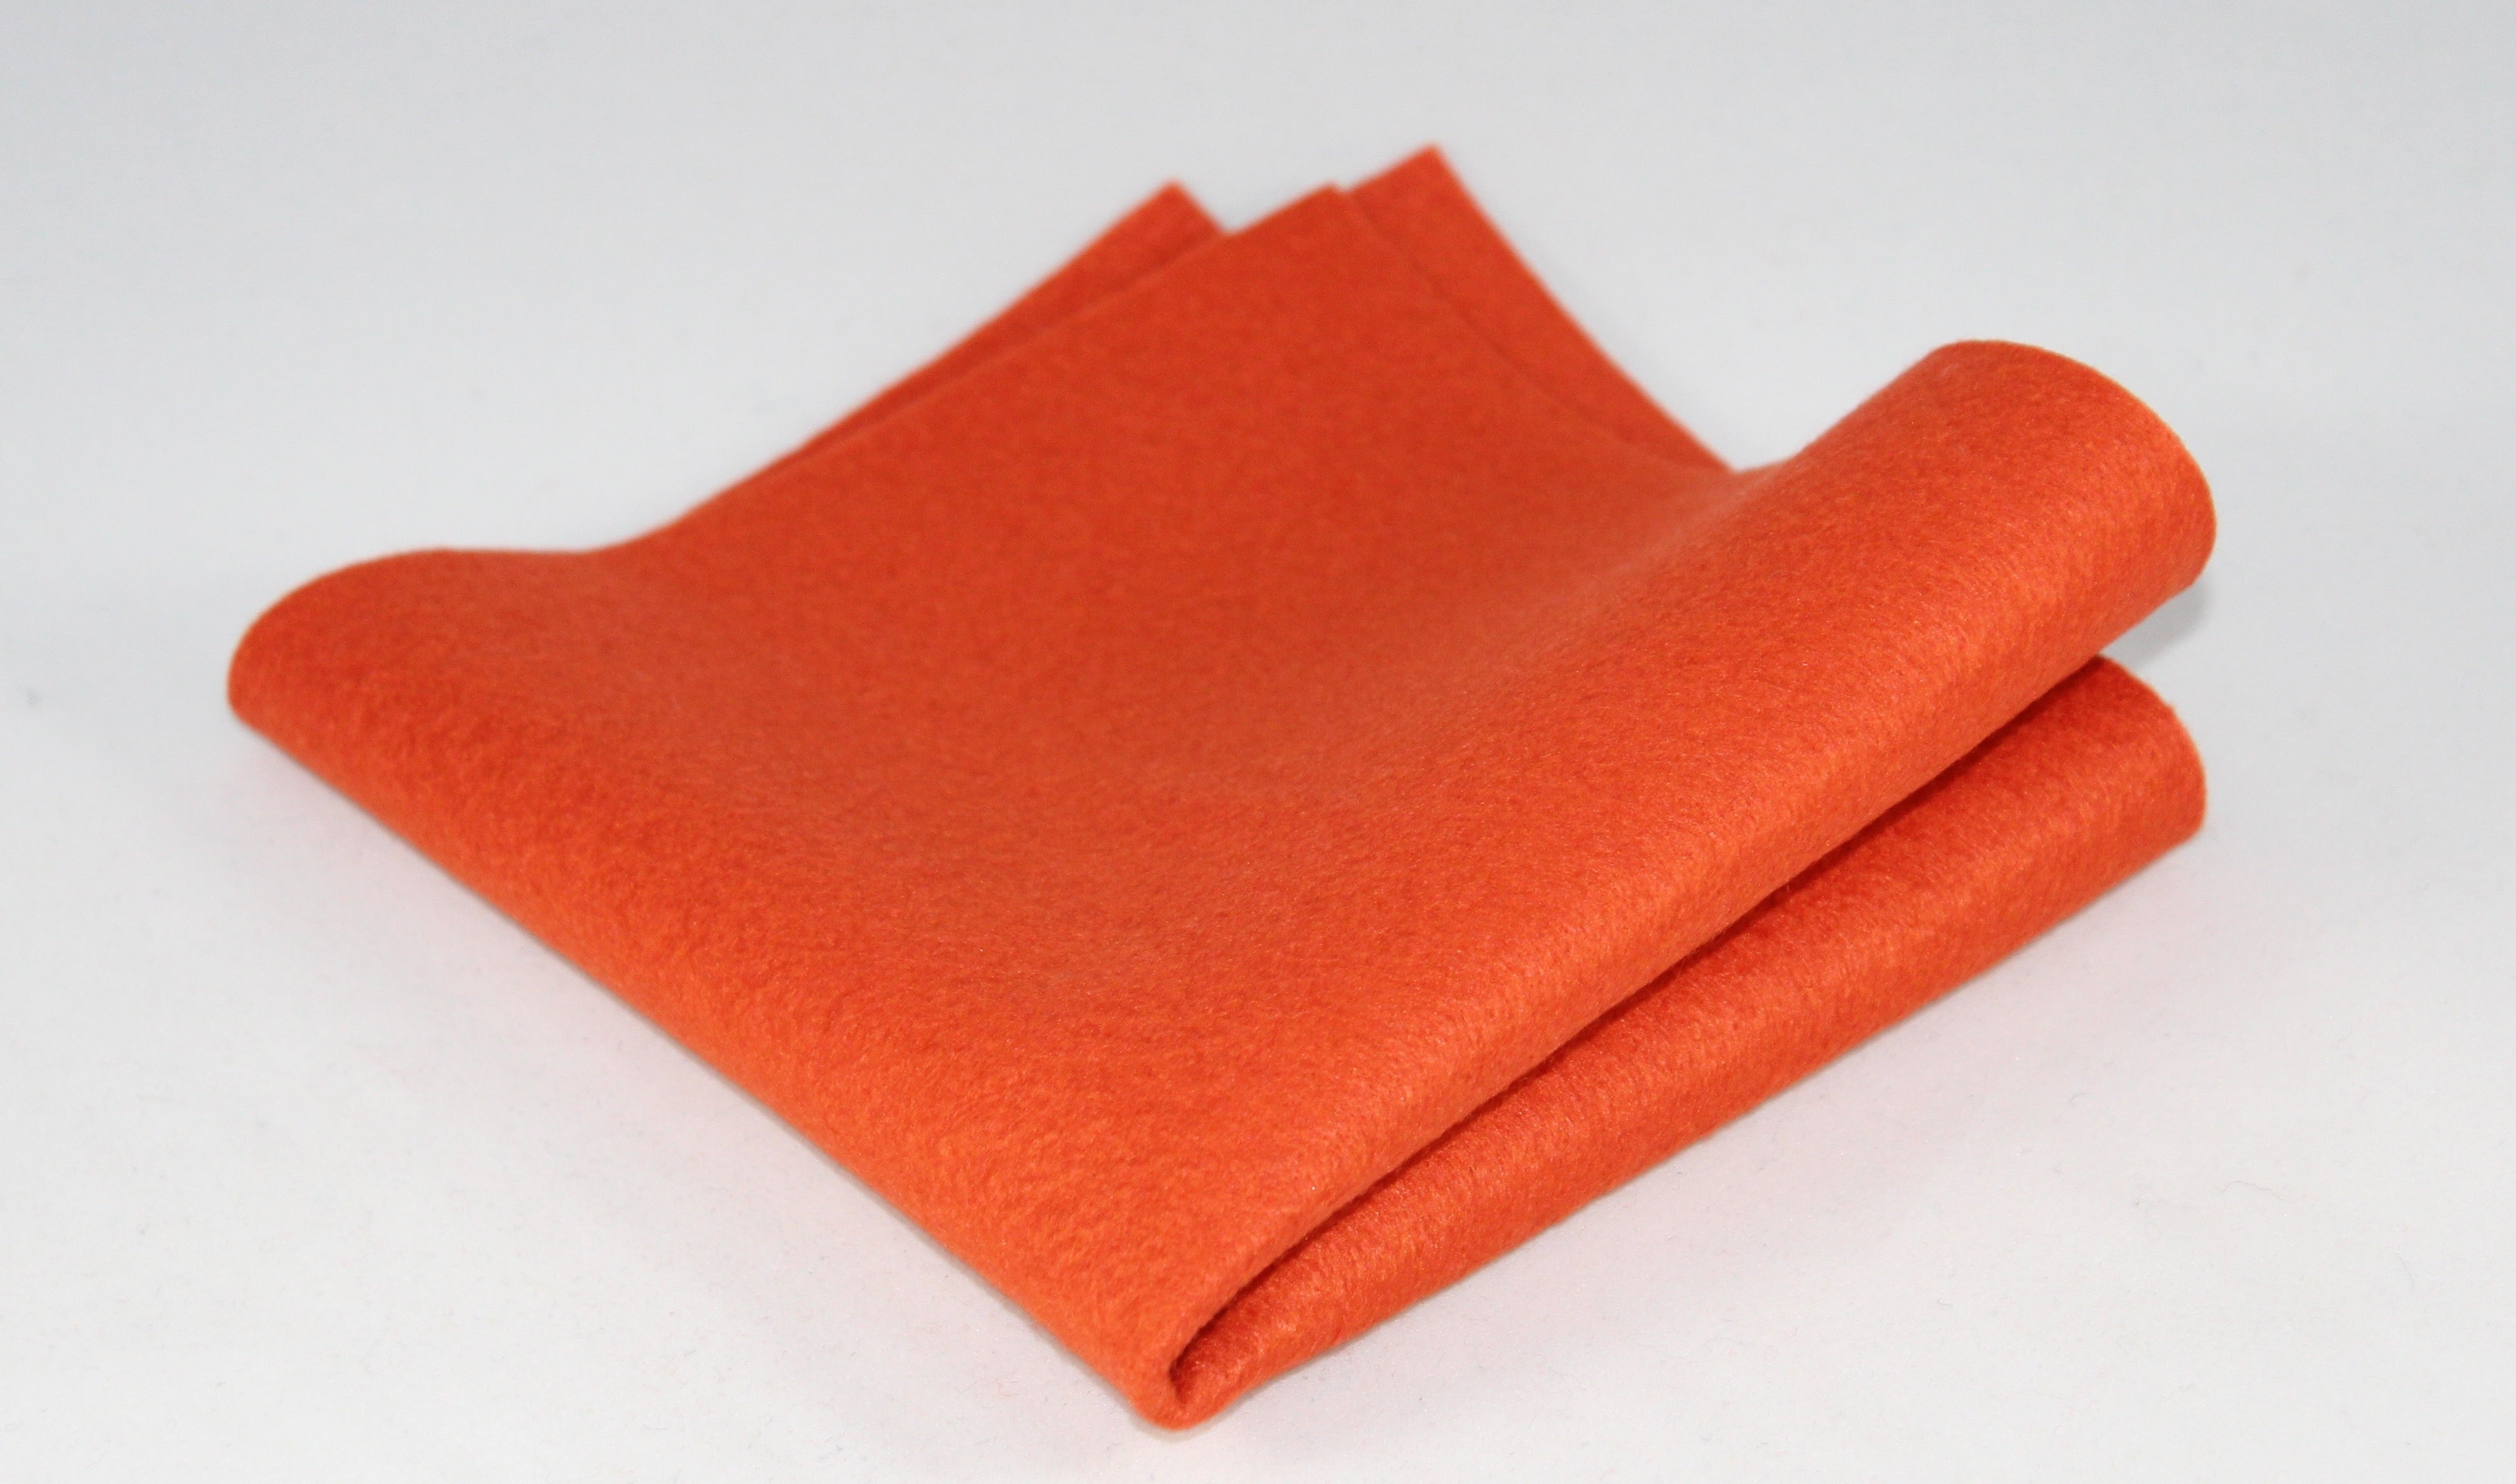 Bamboo and Rayon Eco Felt - Coral Reef